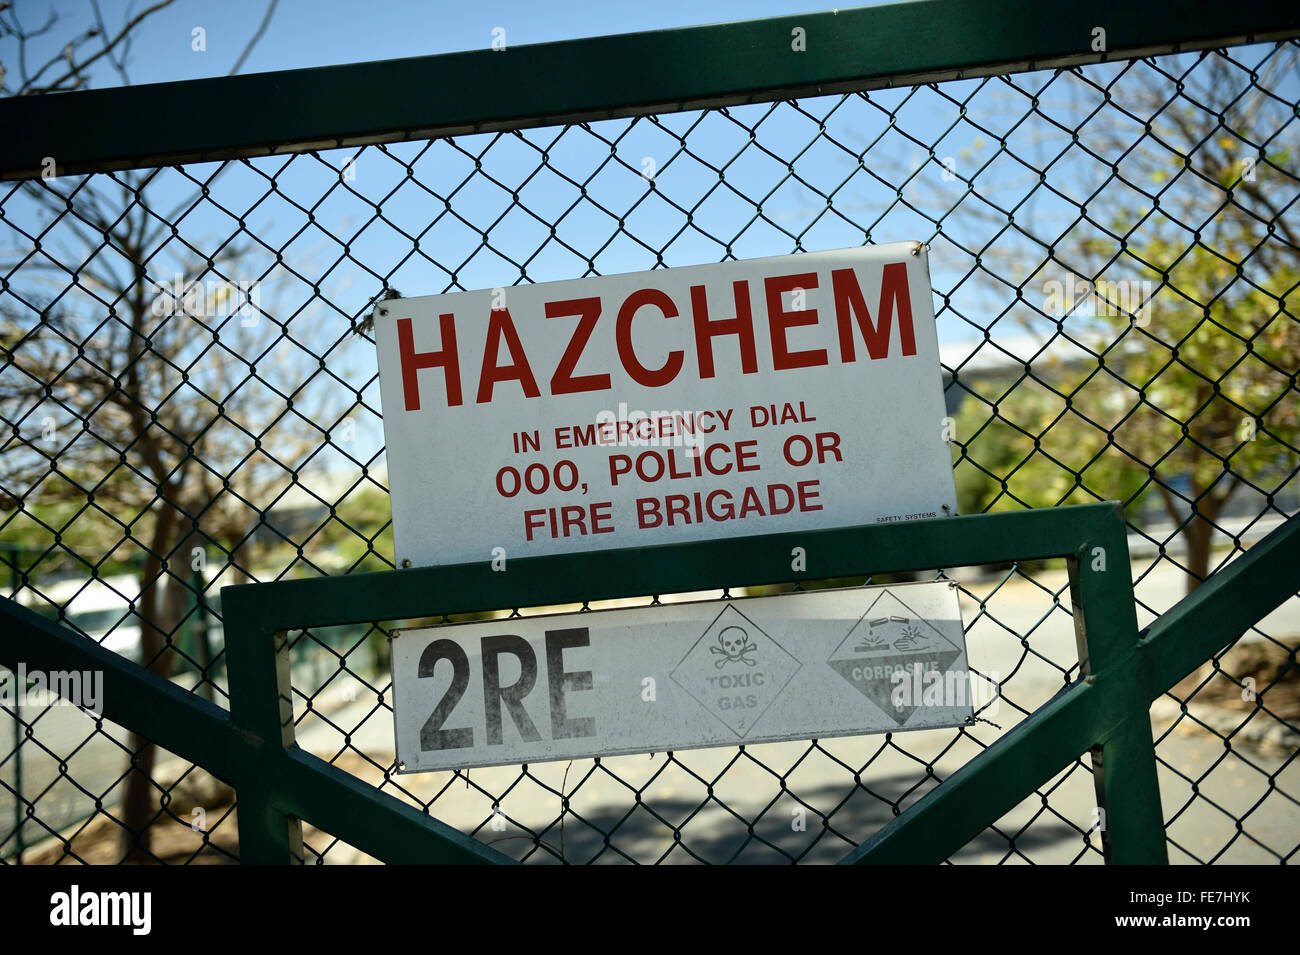 Hazchem sign warning of hazardous, dangerous chemicals, with Emergency Services, police and fire brigade, phone numbers. Stock Photo